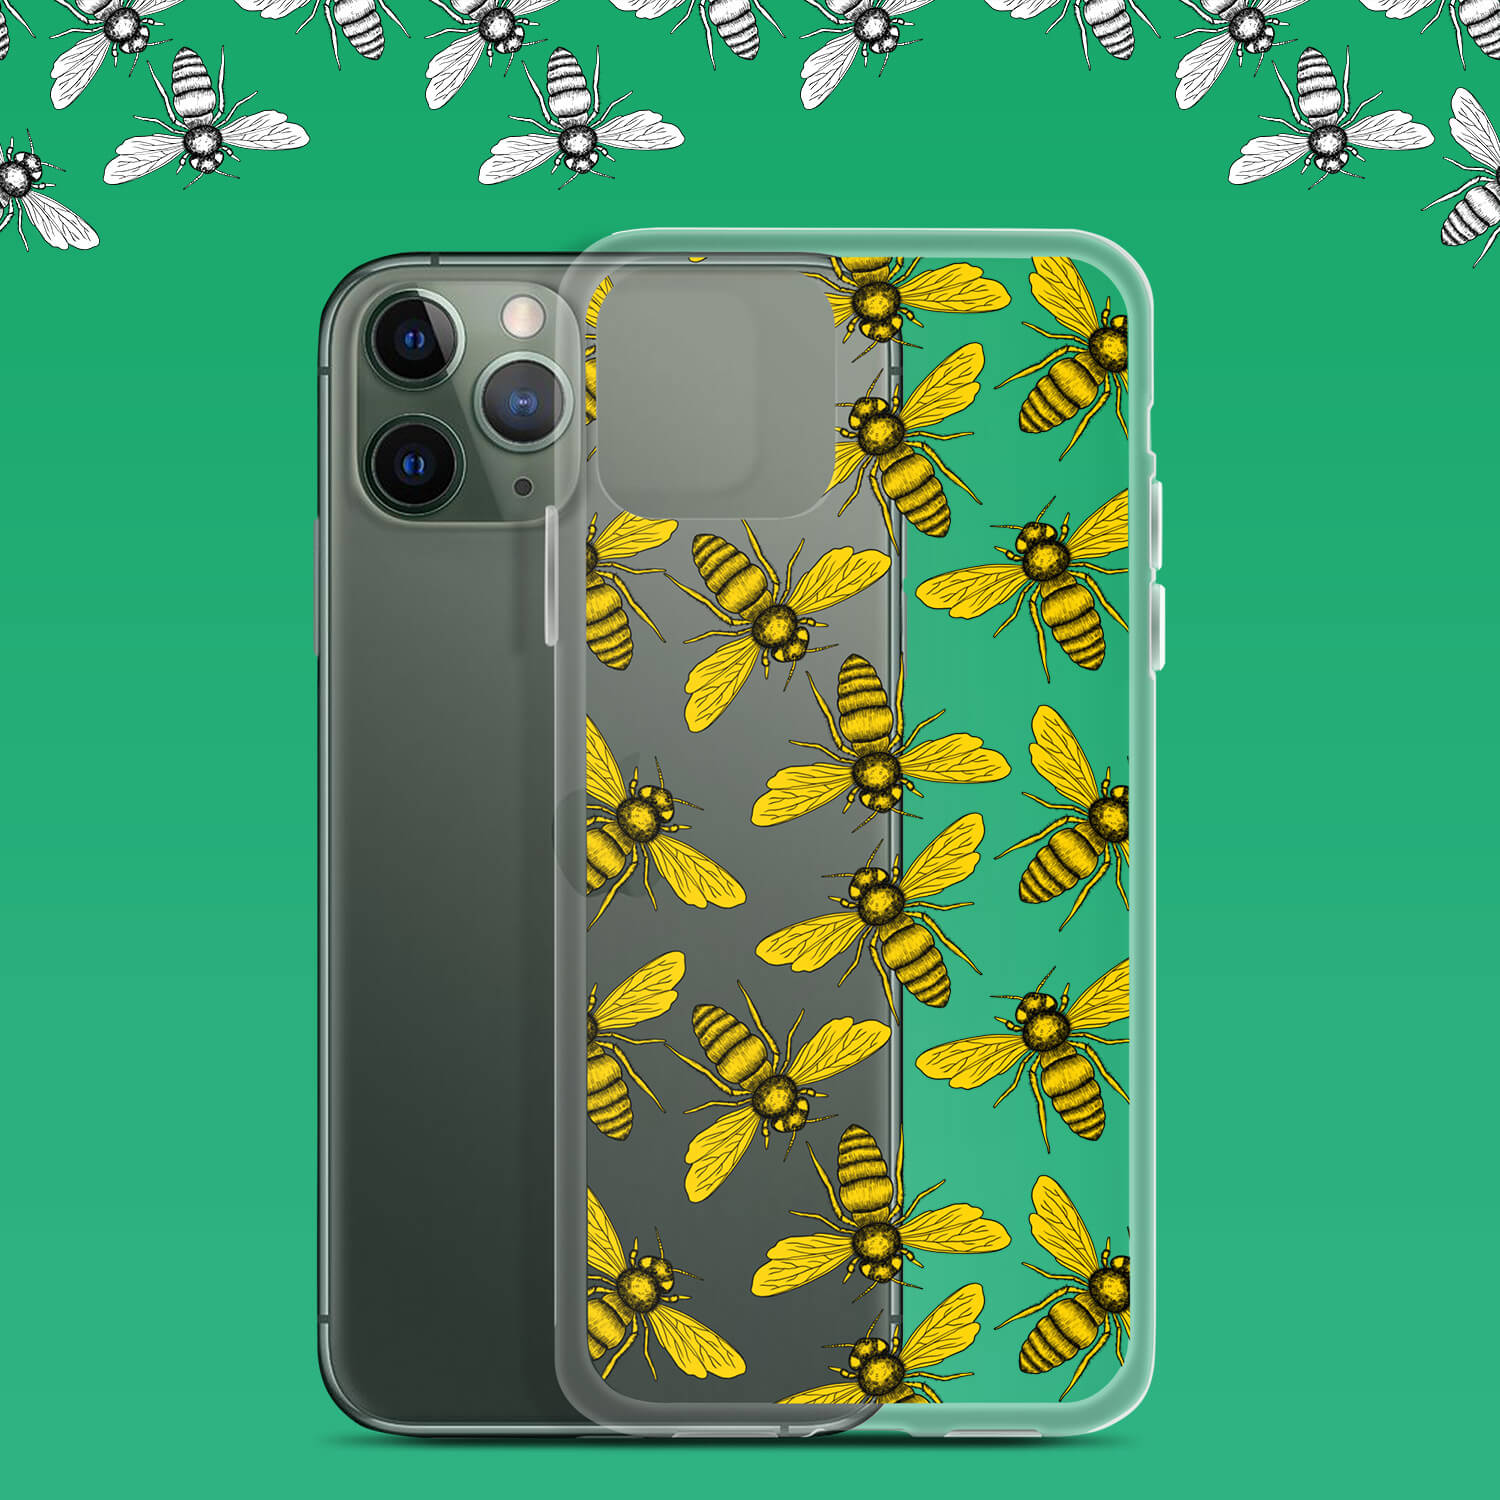 Hand drawn Honey Bees iPhone case